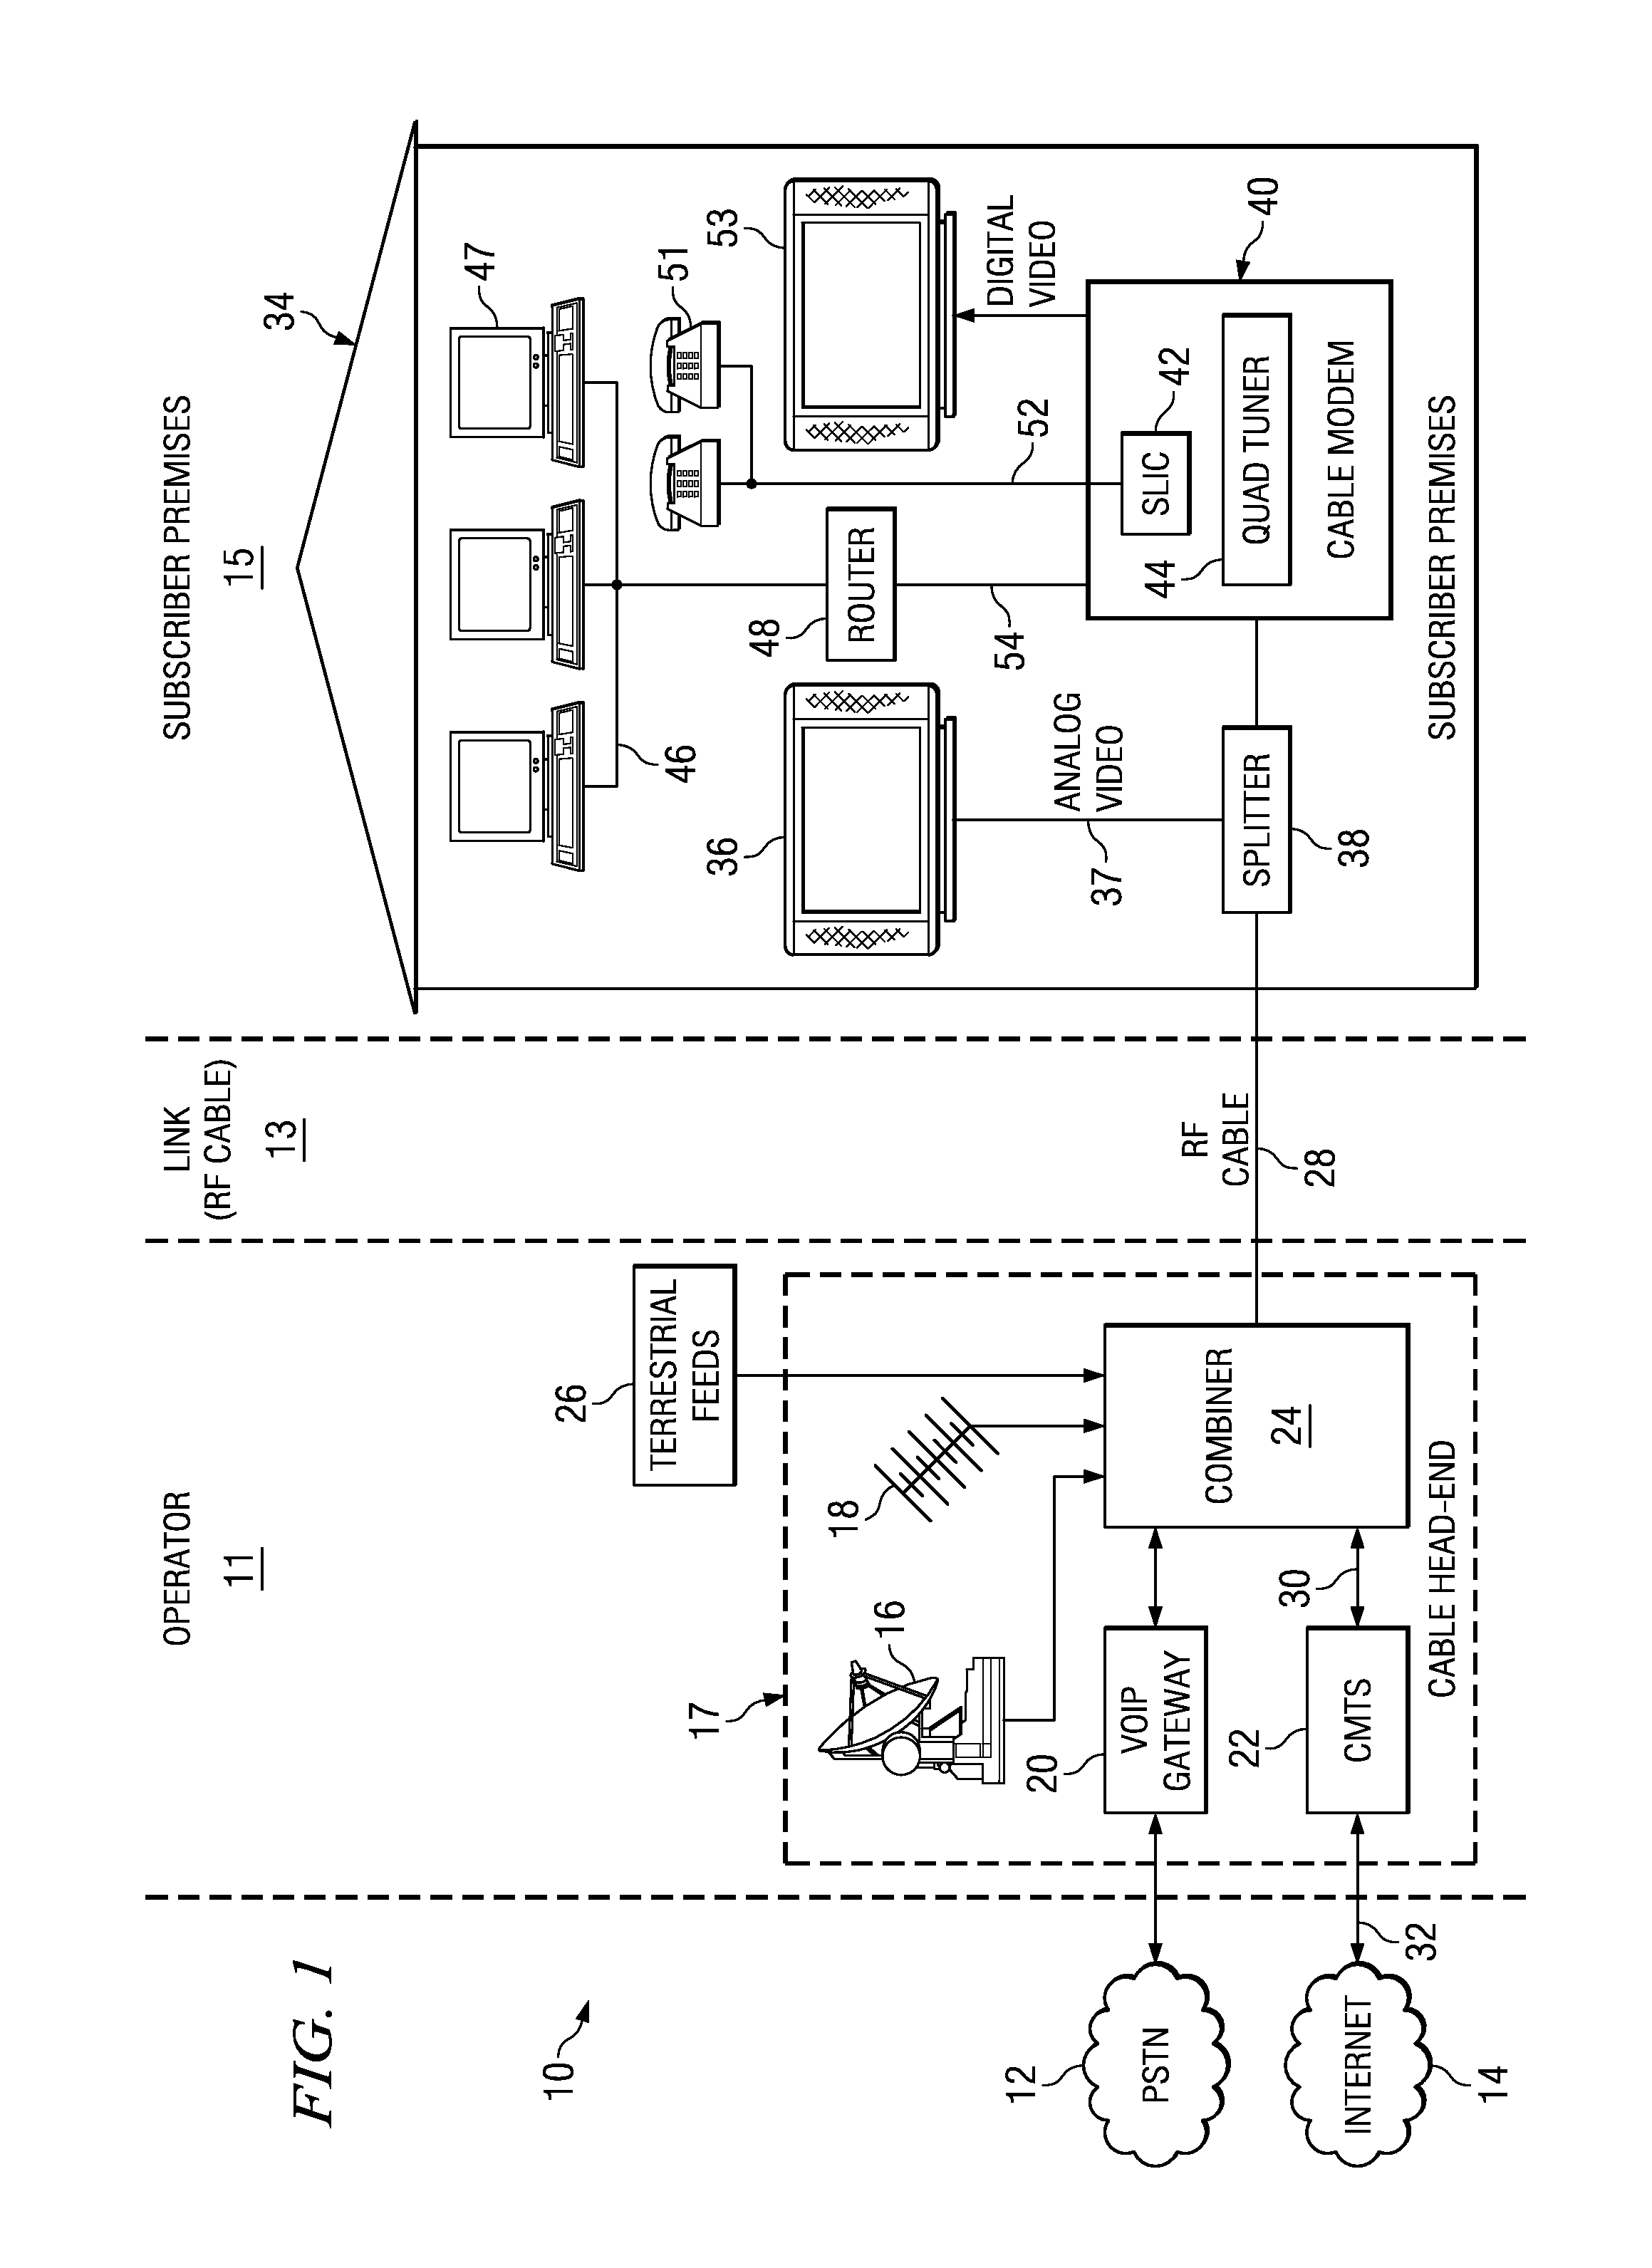 Single chip tuner integrated circuit for use in a cable modem